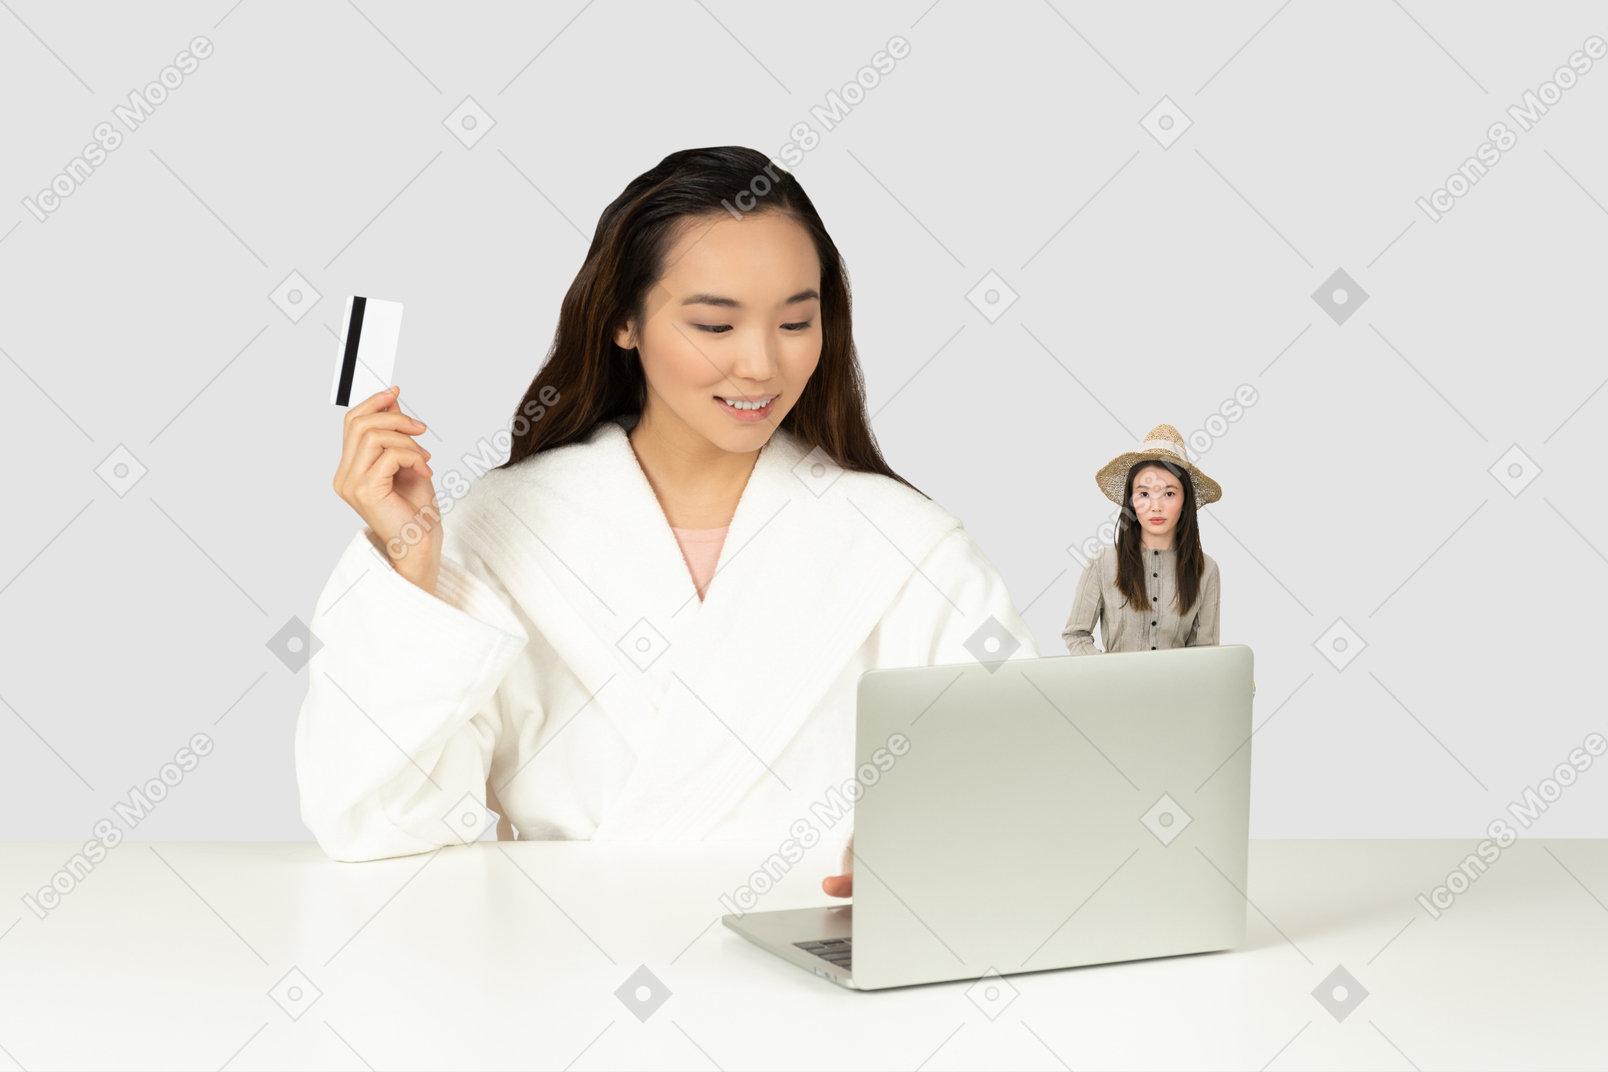 Woman in front of laptop holding credit card and her little copy